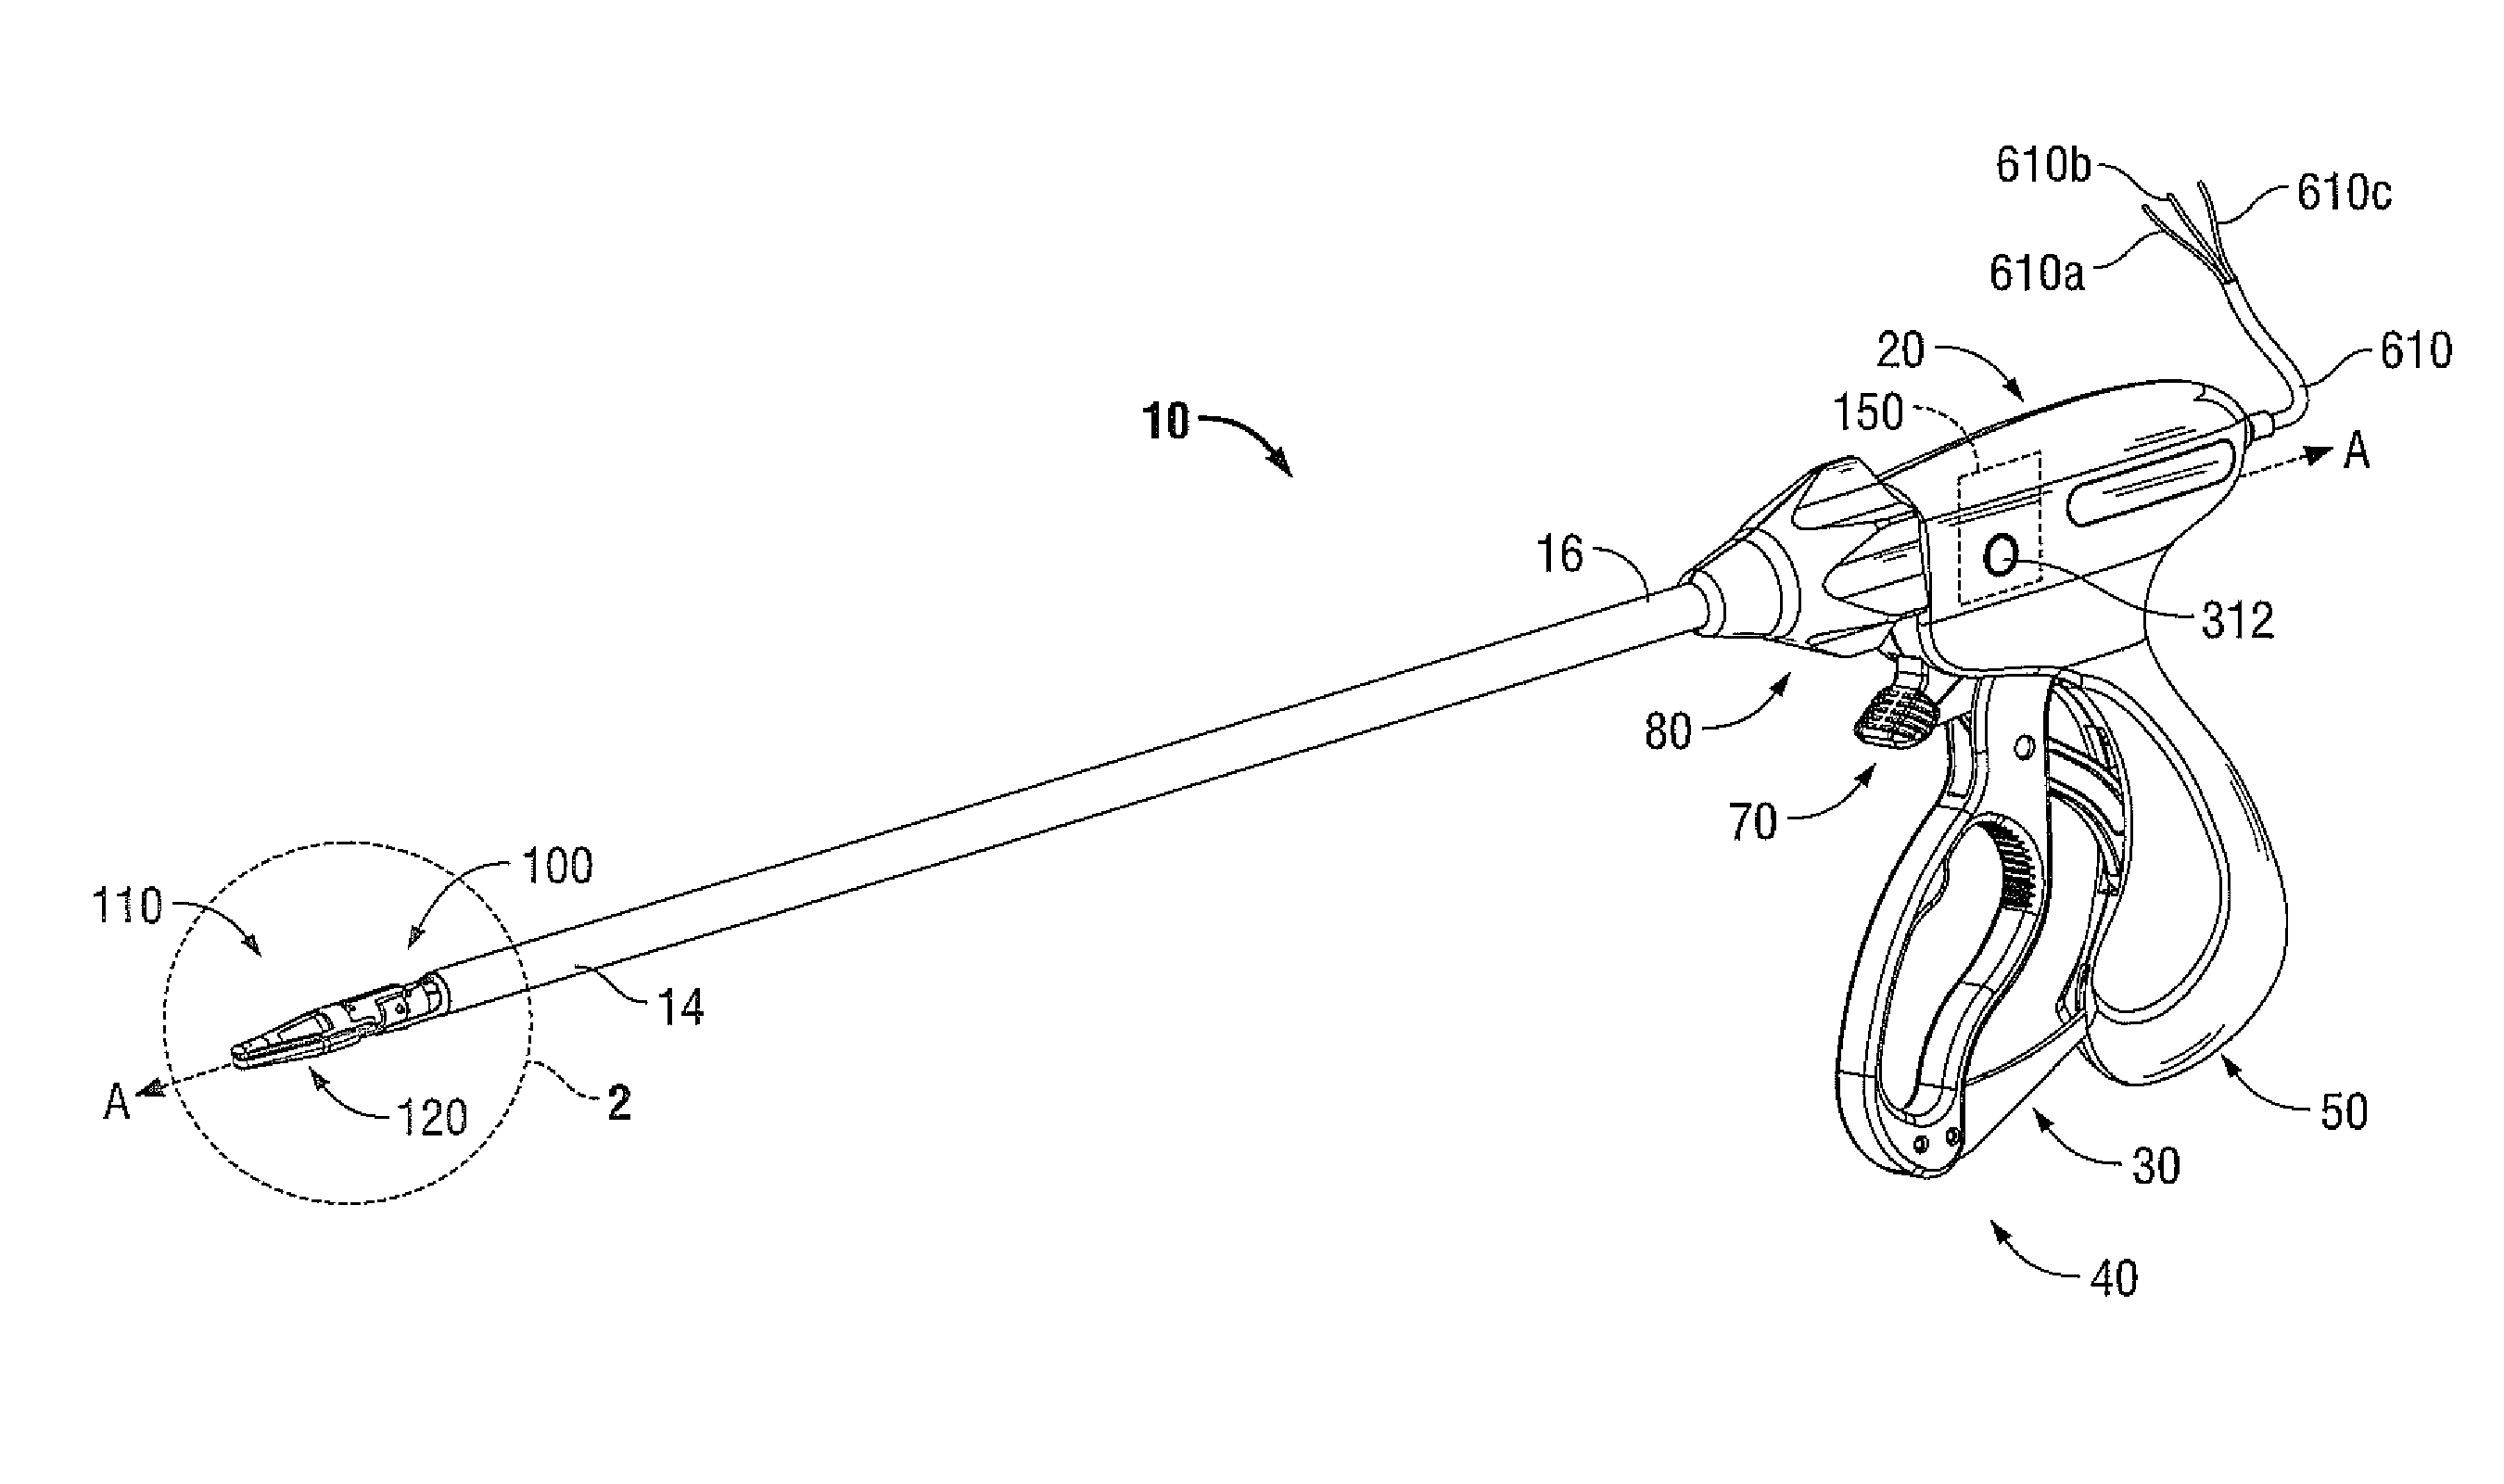 Apparatus with Multiple Channel Selective Cutting